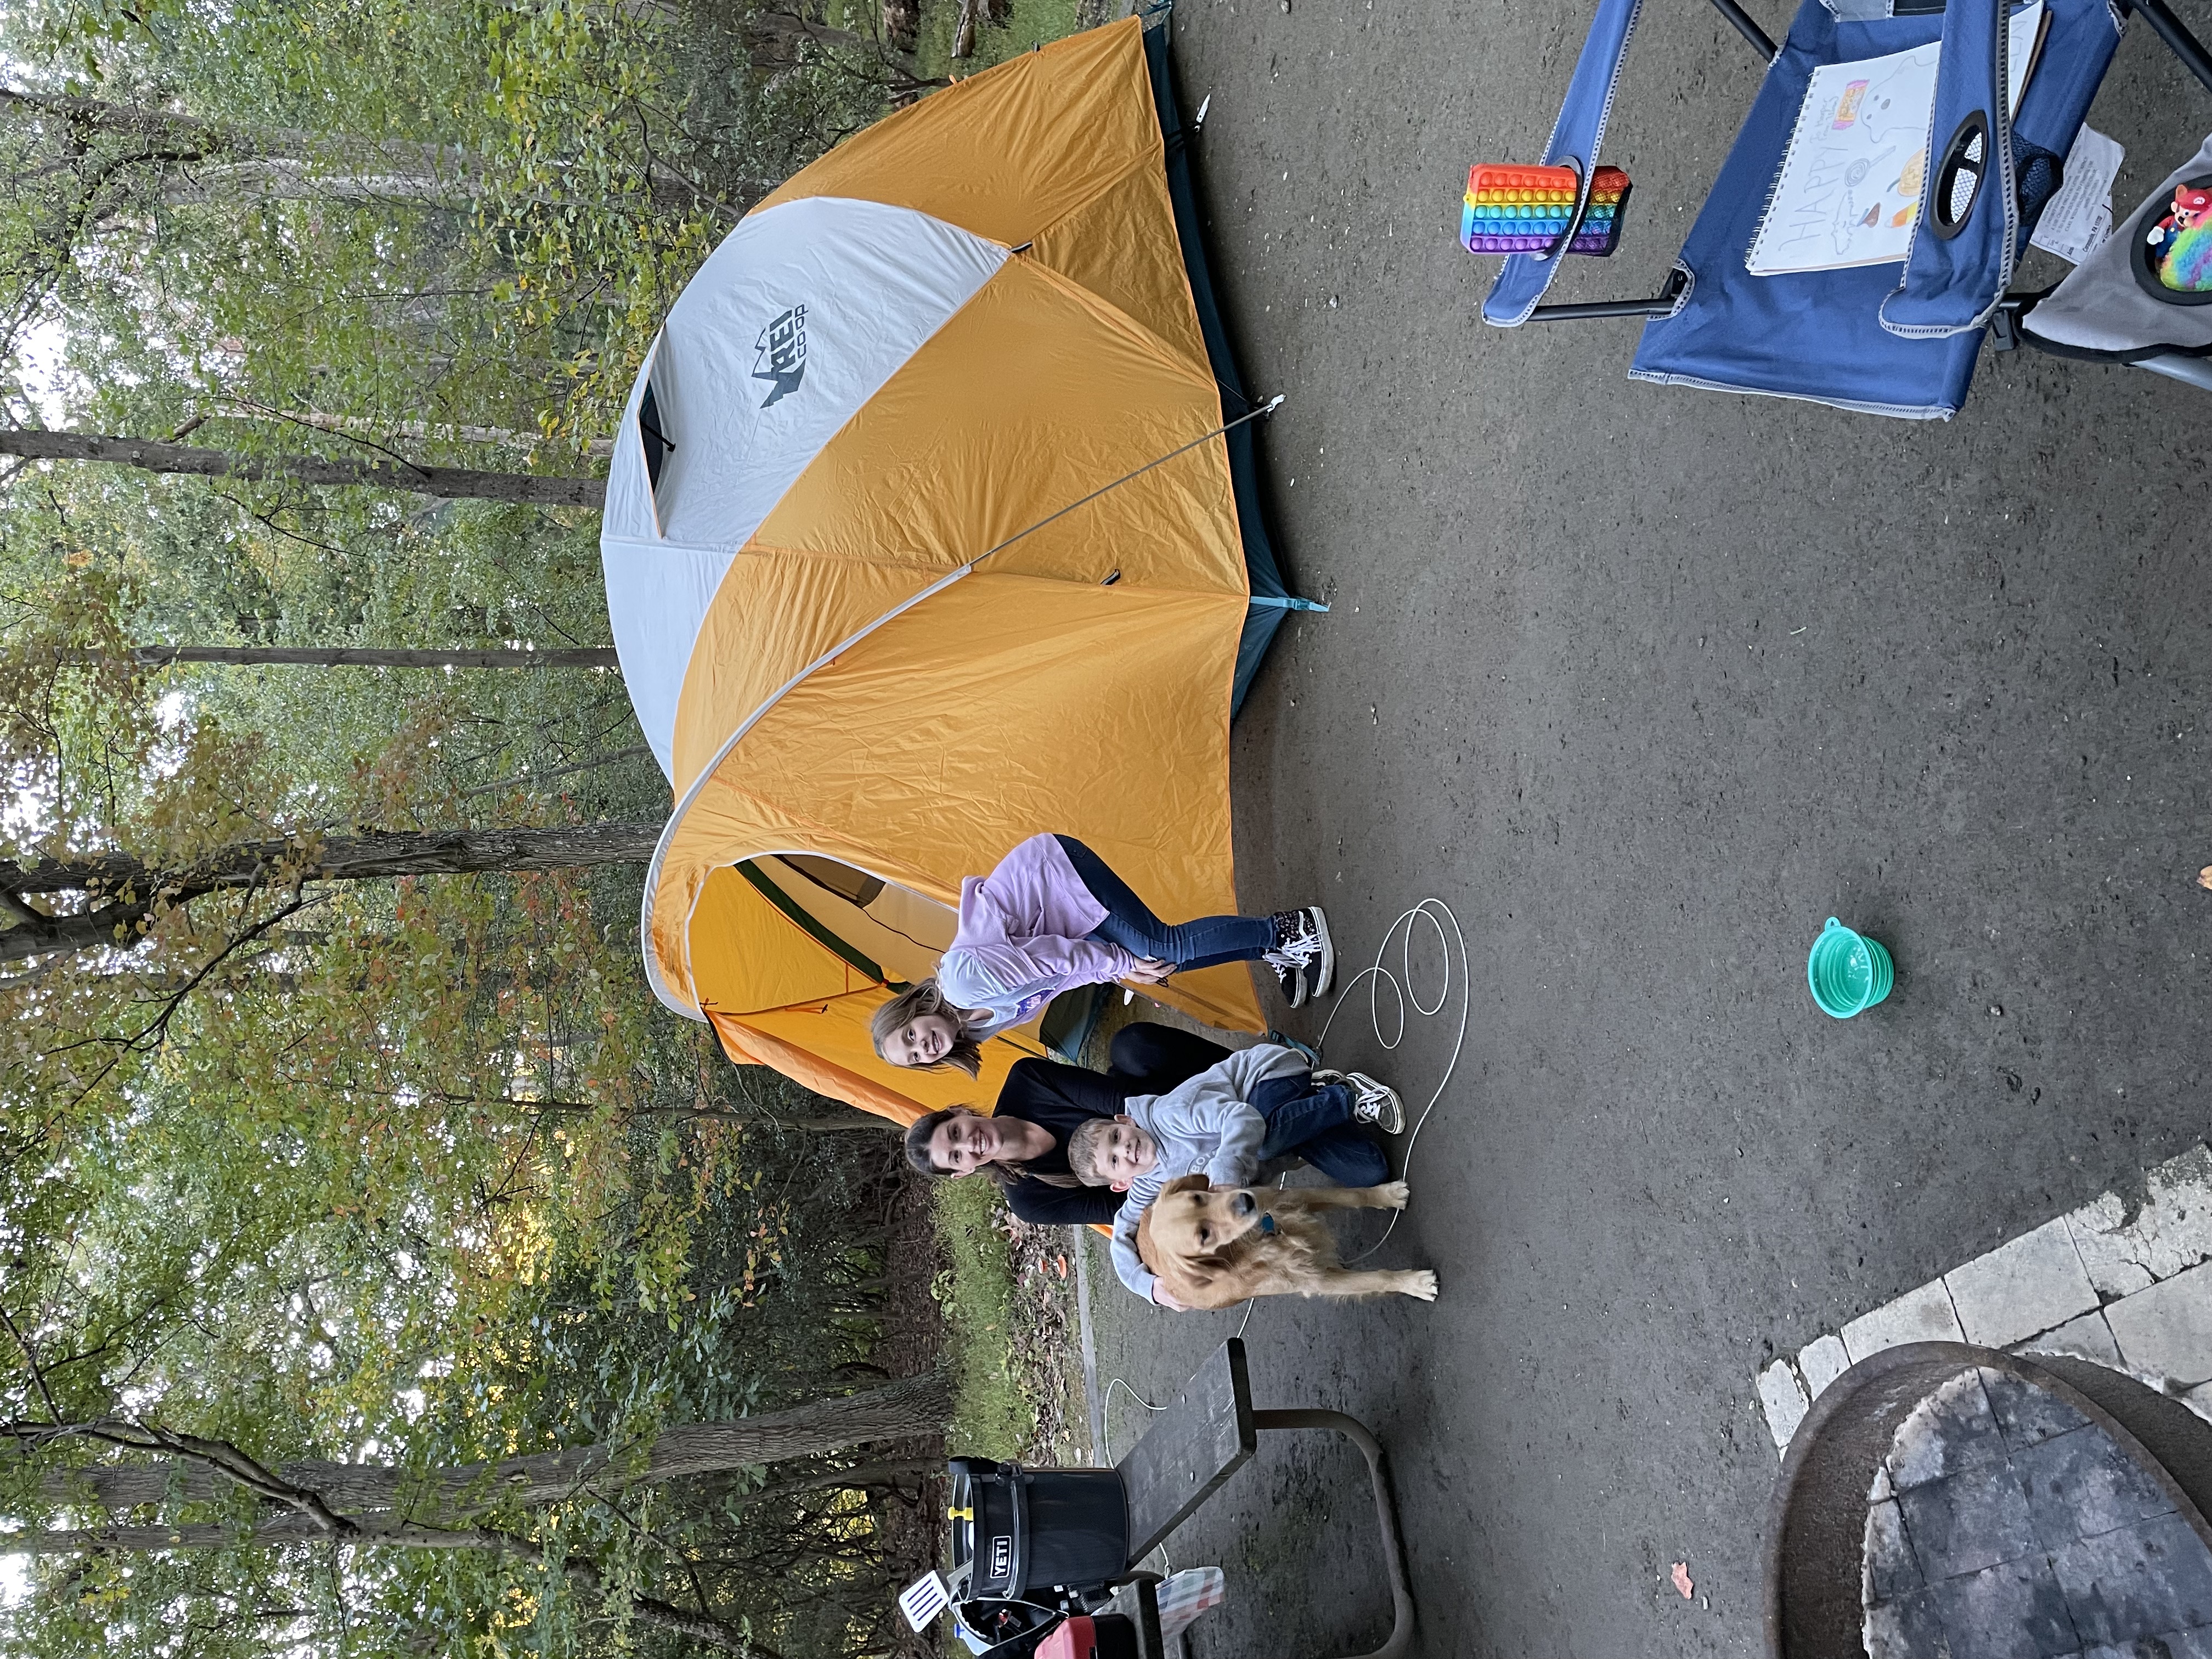 During the COVID-19 pandemic, attorney Tom Uebler and his family took up camping. His wife, Cameron, and their two children, Wren and Beck, with their dog Tilly set up the tent at a site near Chesapeake Bay.